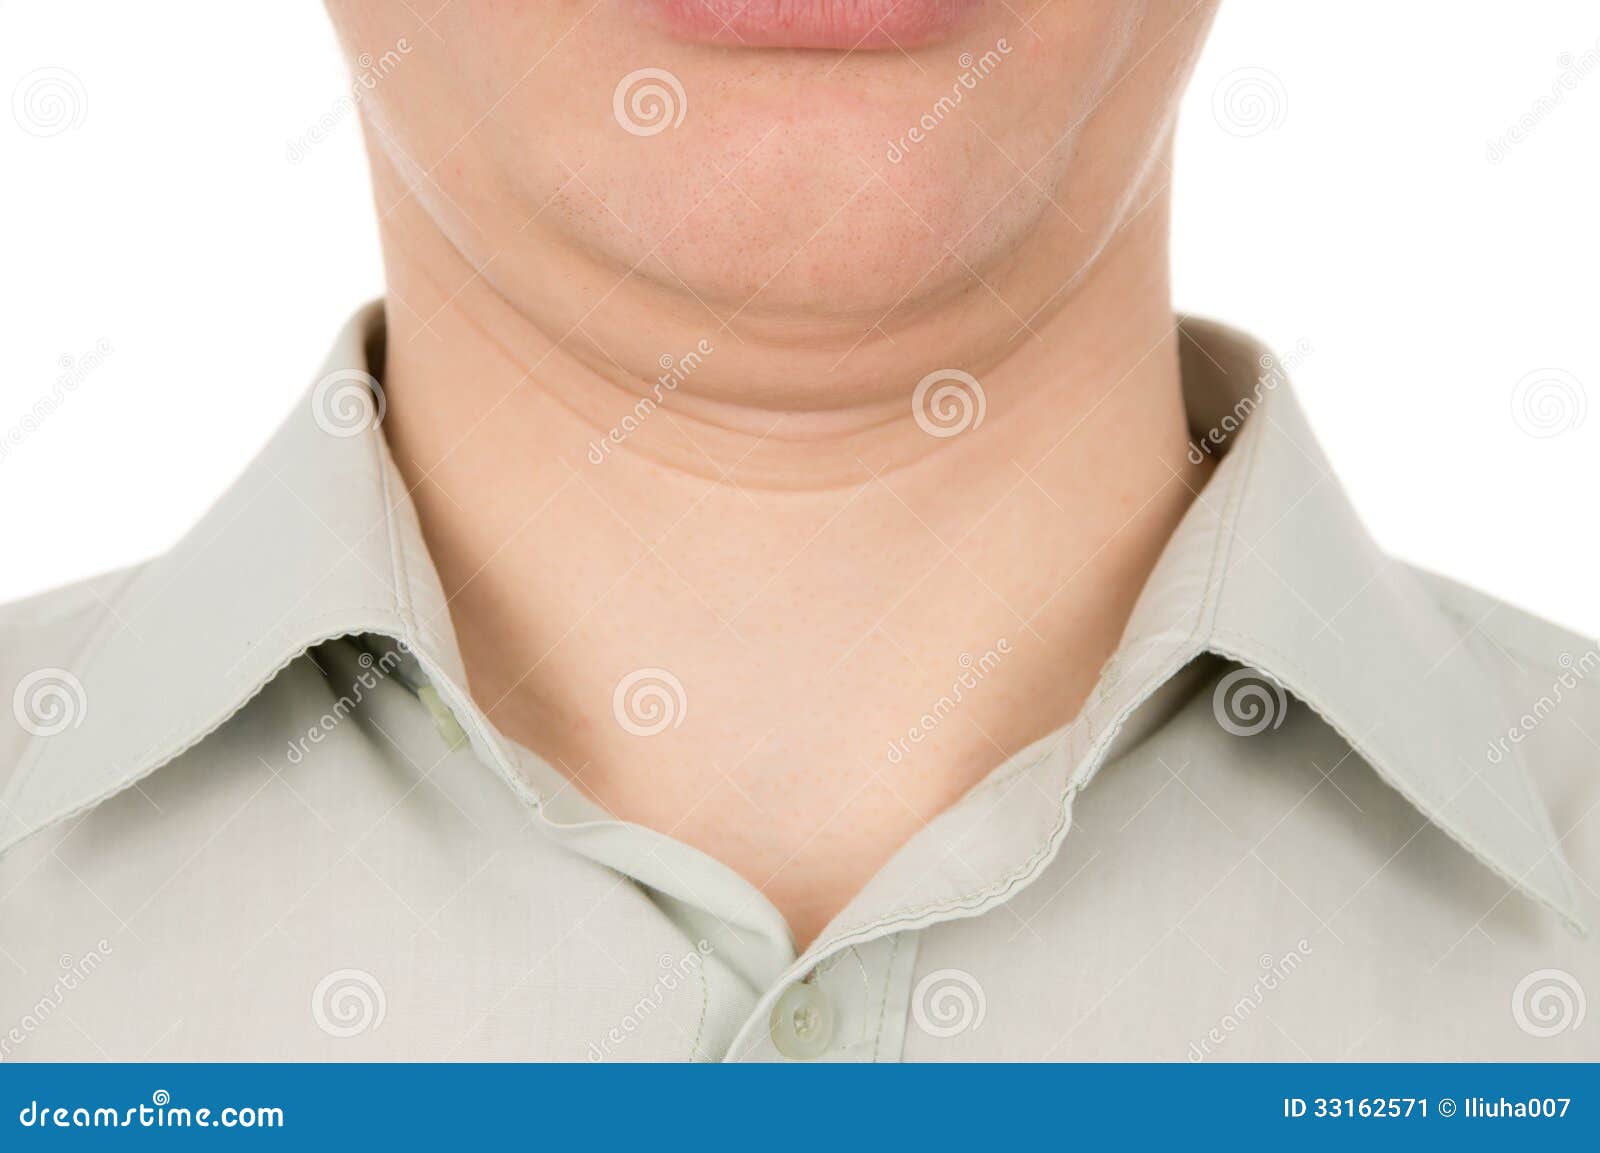 the guy the second chin